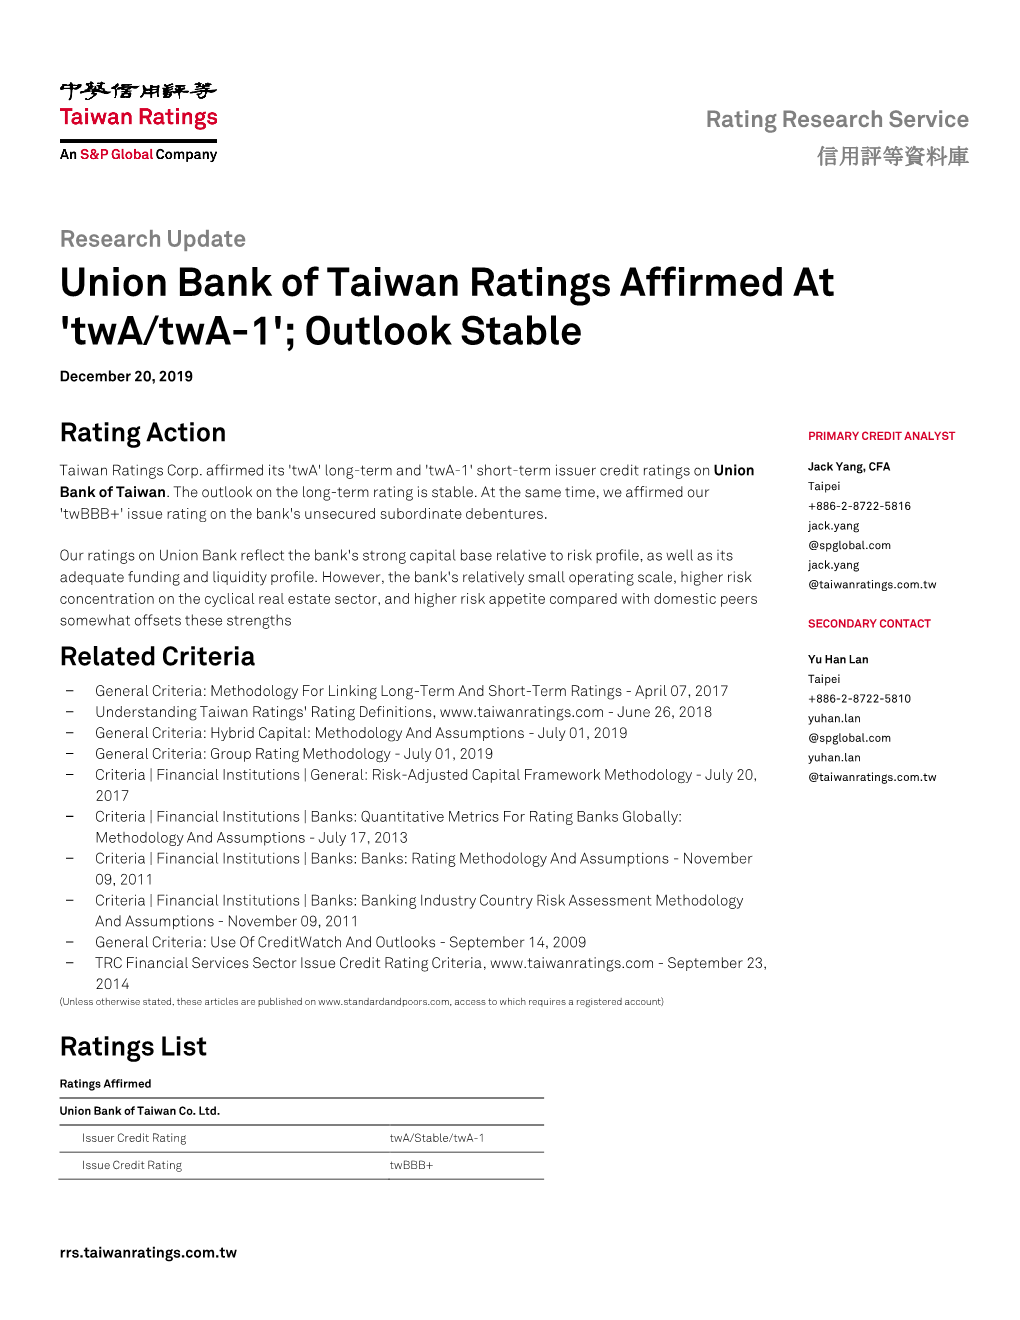 Union Bank of Taiwan Ratings Affirmed at 'Twa/Twa-1'; Outlook Stable